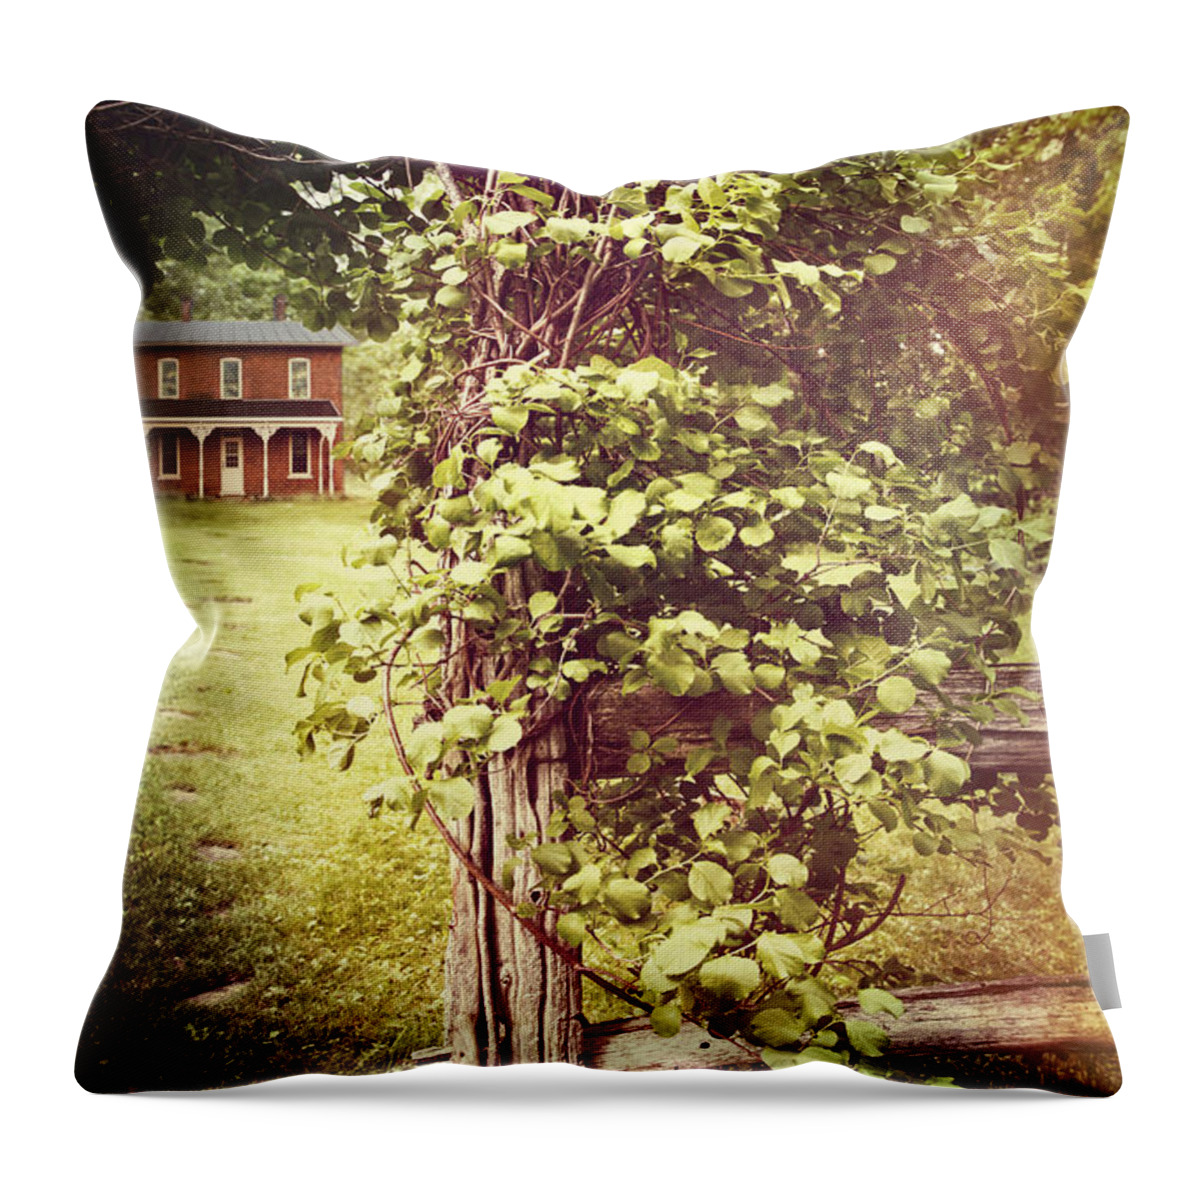 Aged Throw Pillow featuring the photograph Old farmhouse at the end of a arched path by Sandra Cunningham